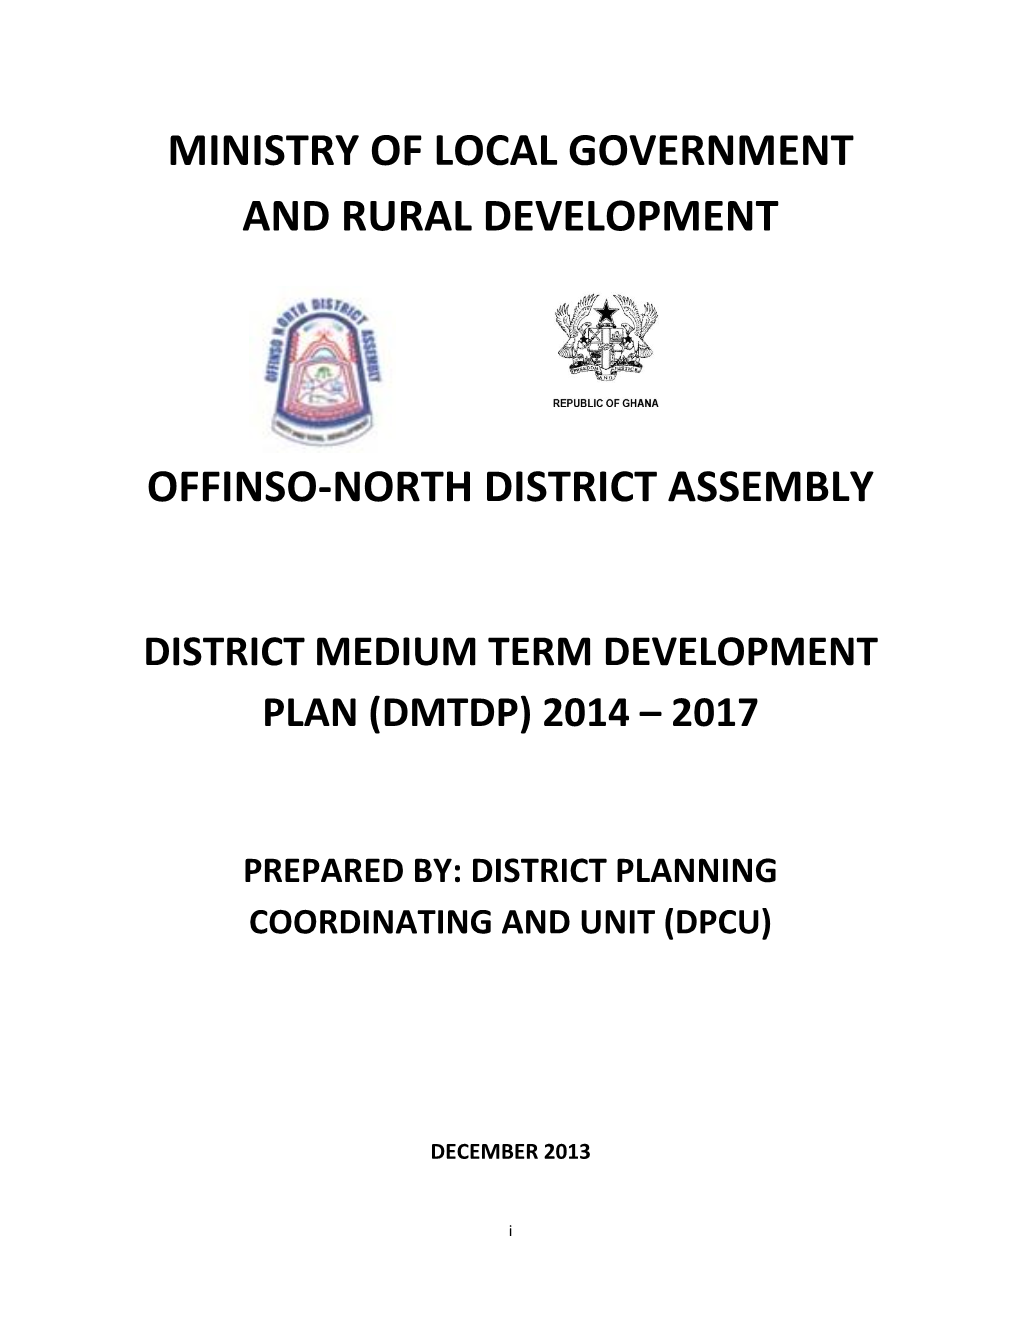 Ministry of Local Government and Rural Development